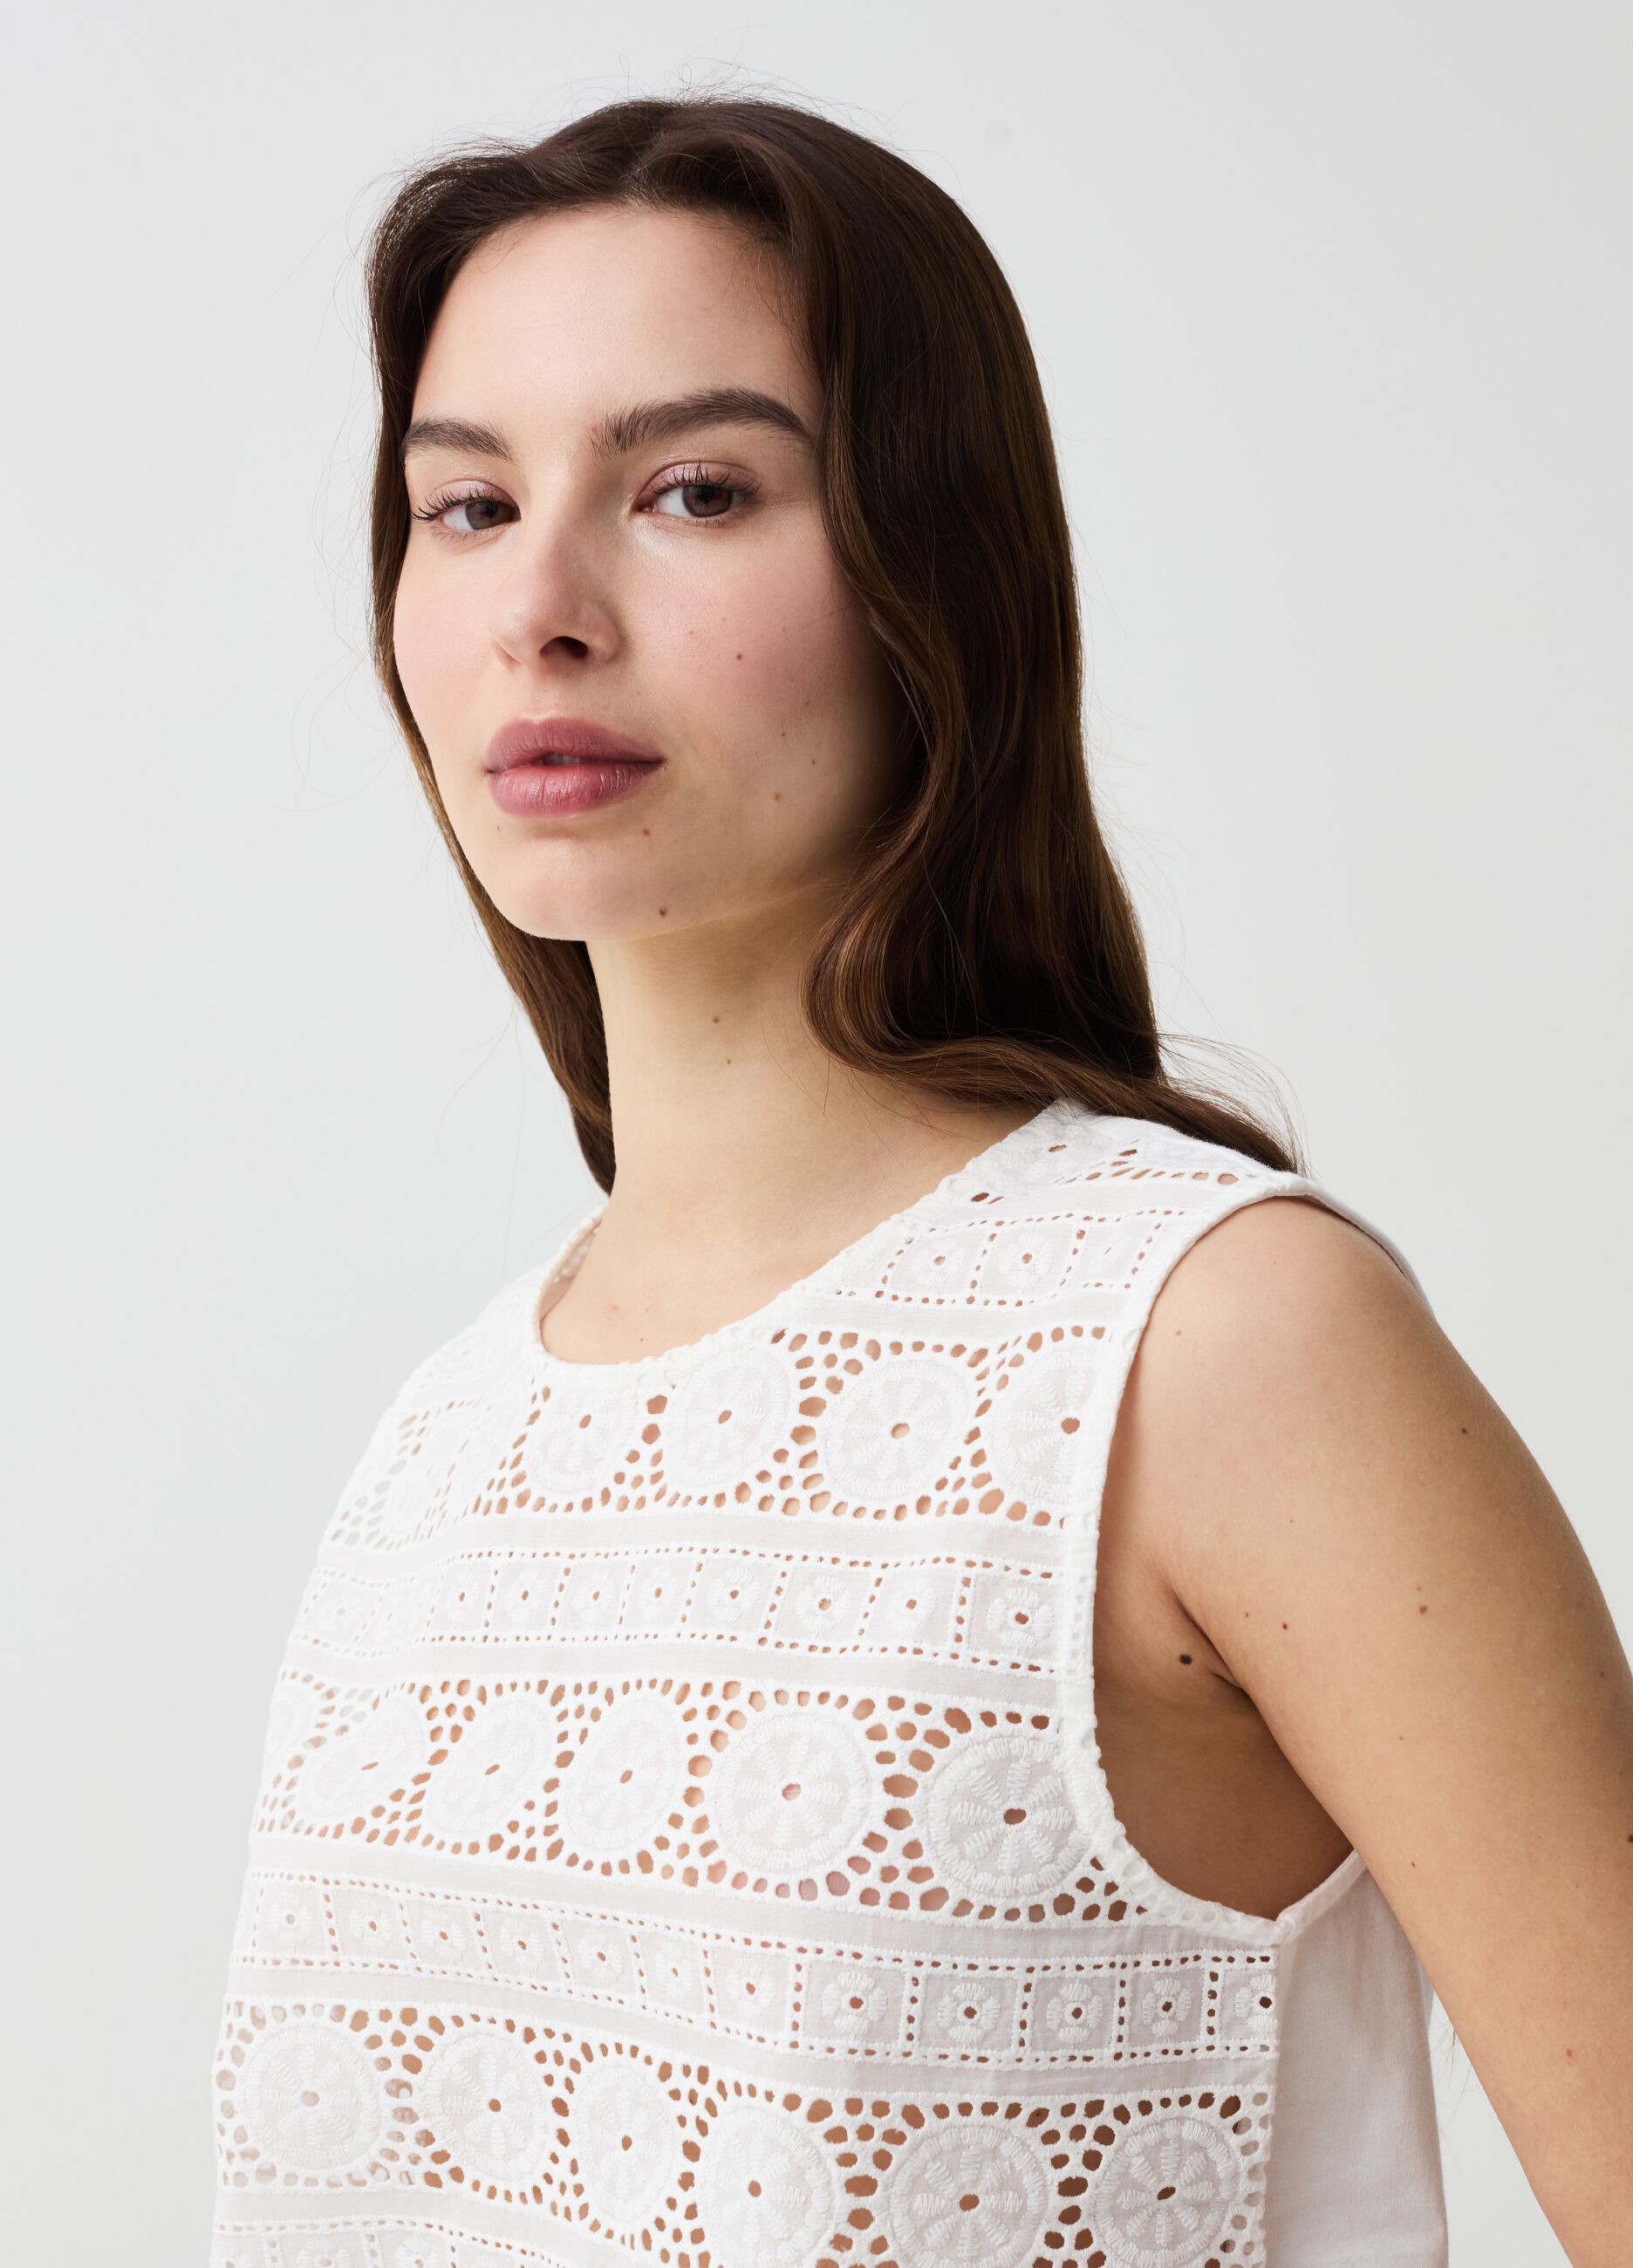 Tank top with broderie anglaise front